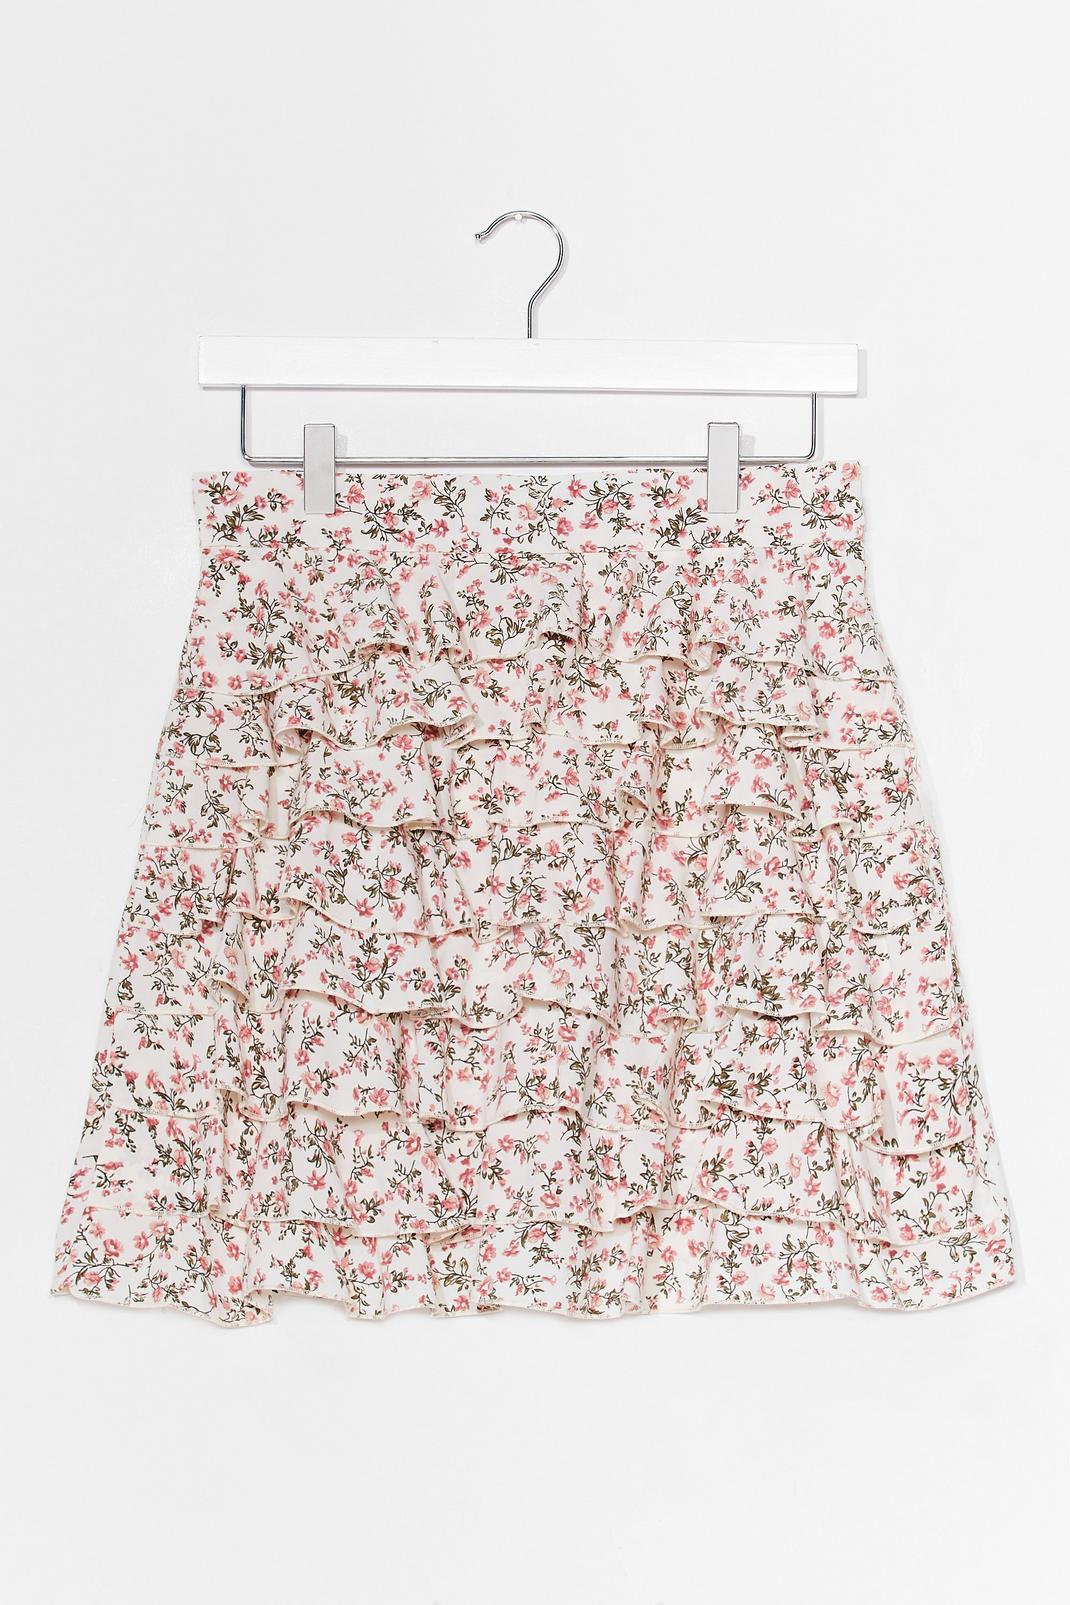 White Growing Them a Good Time Floral Mini Skirt image number 1